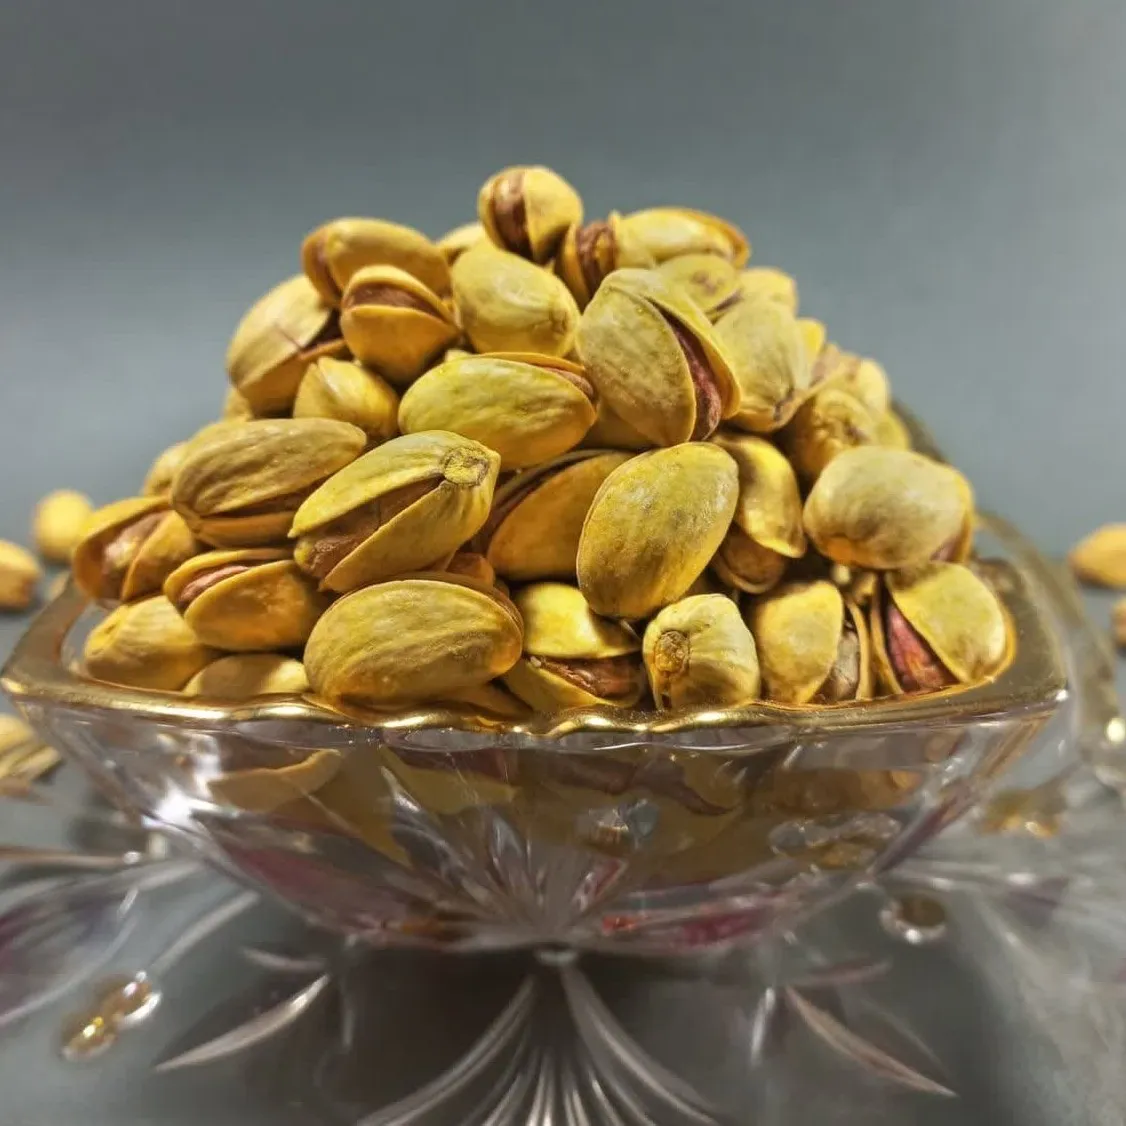 Buy bulk pistachios canada + great price with guaranteed quality